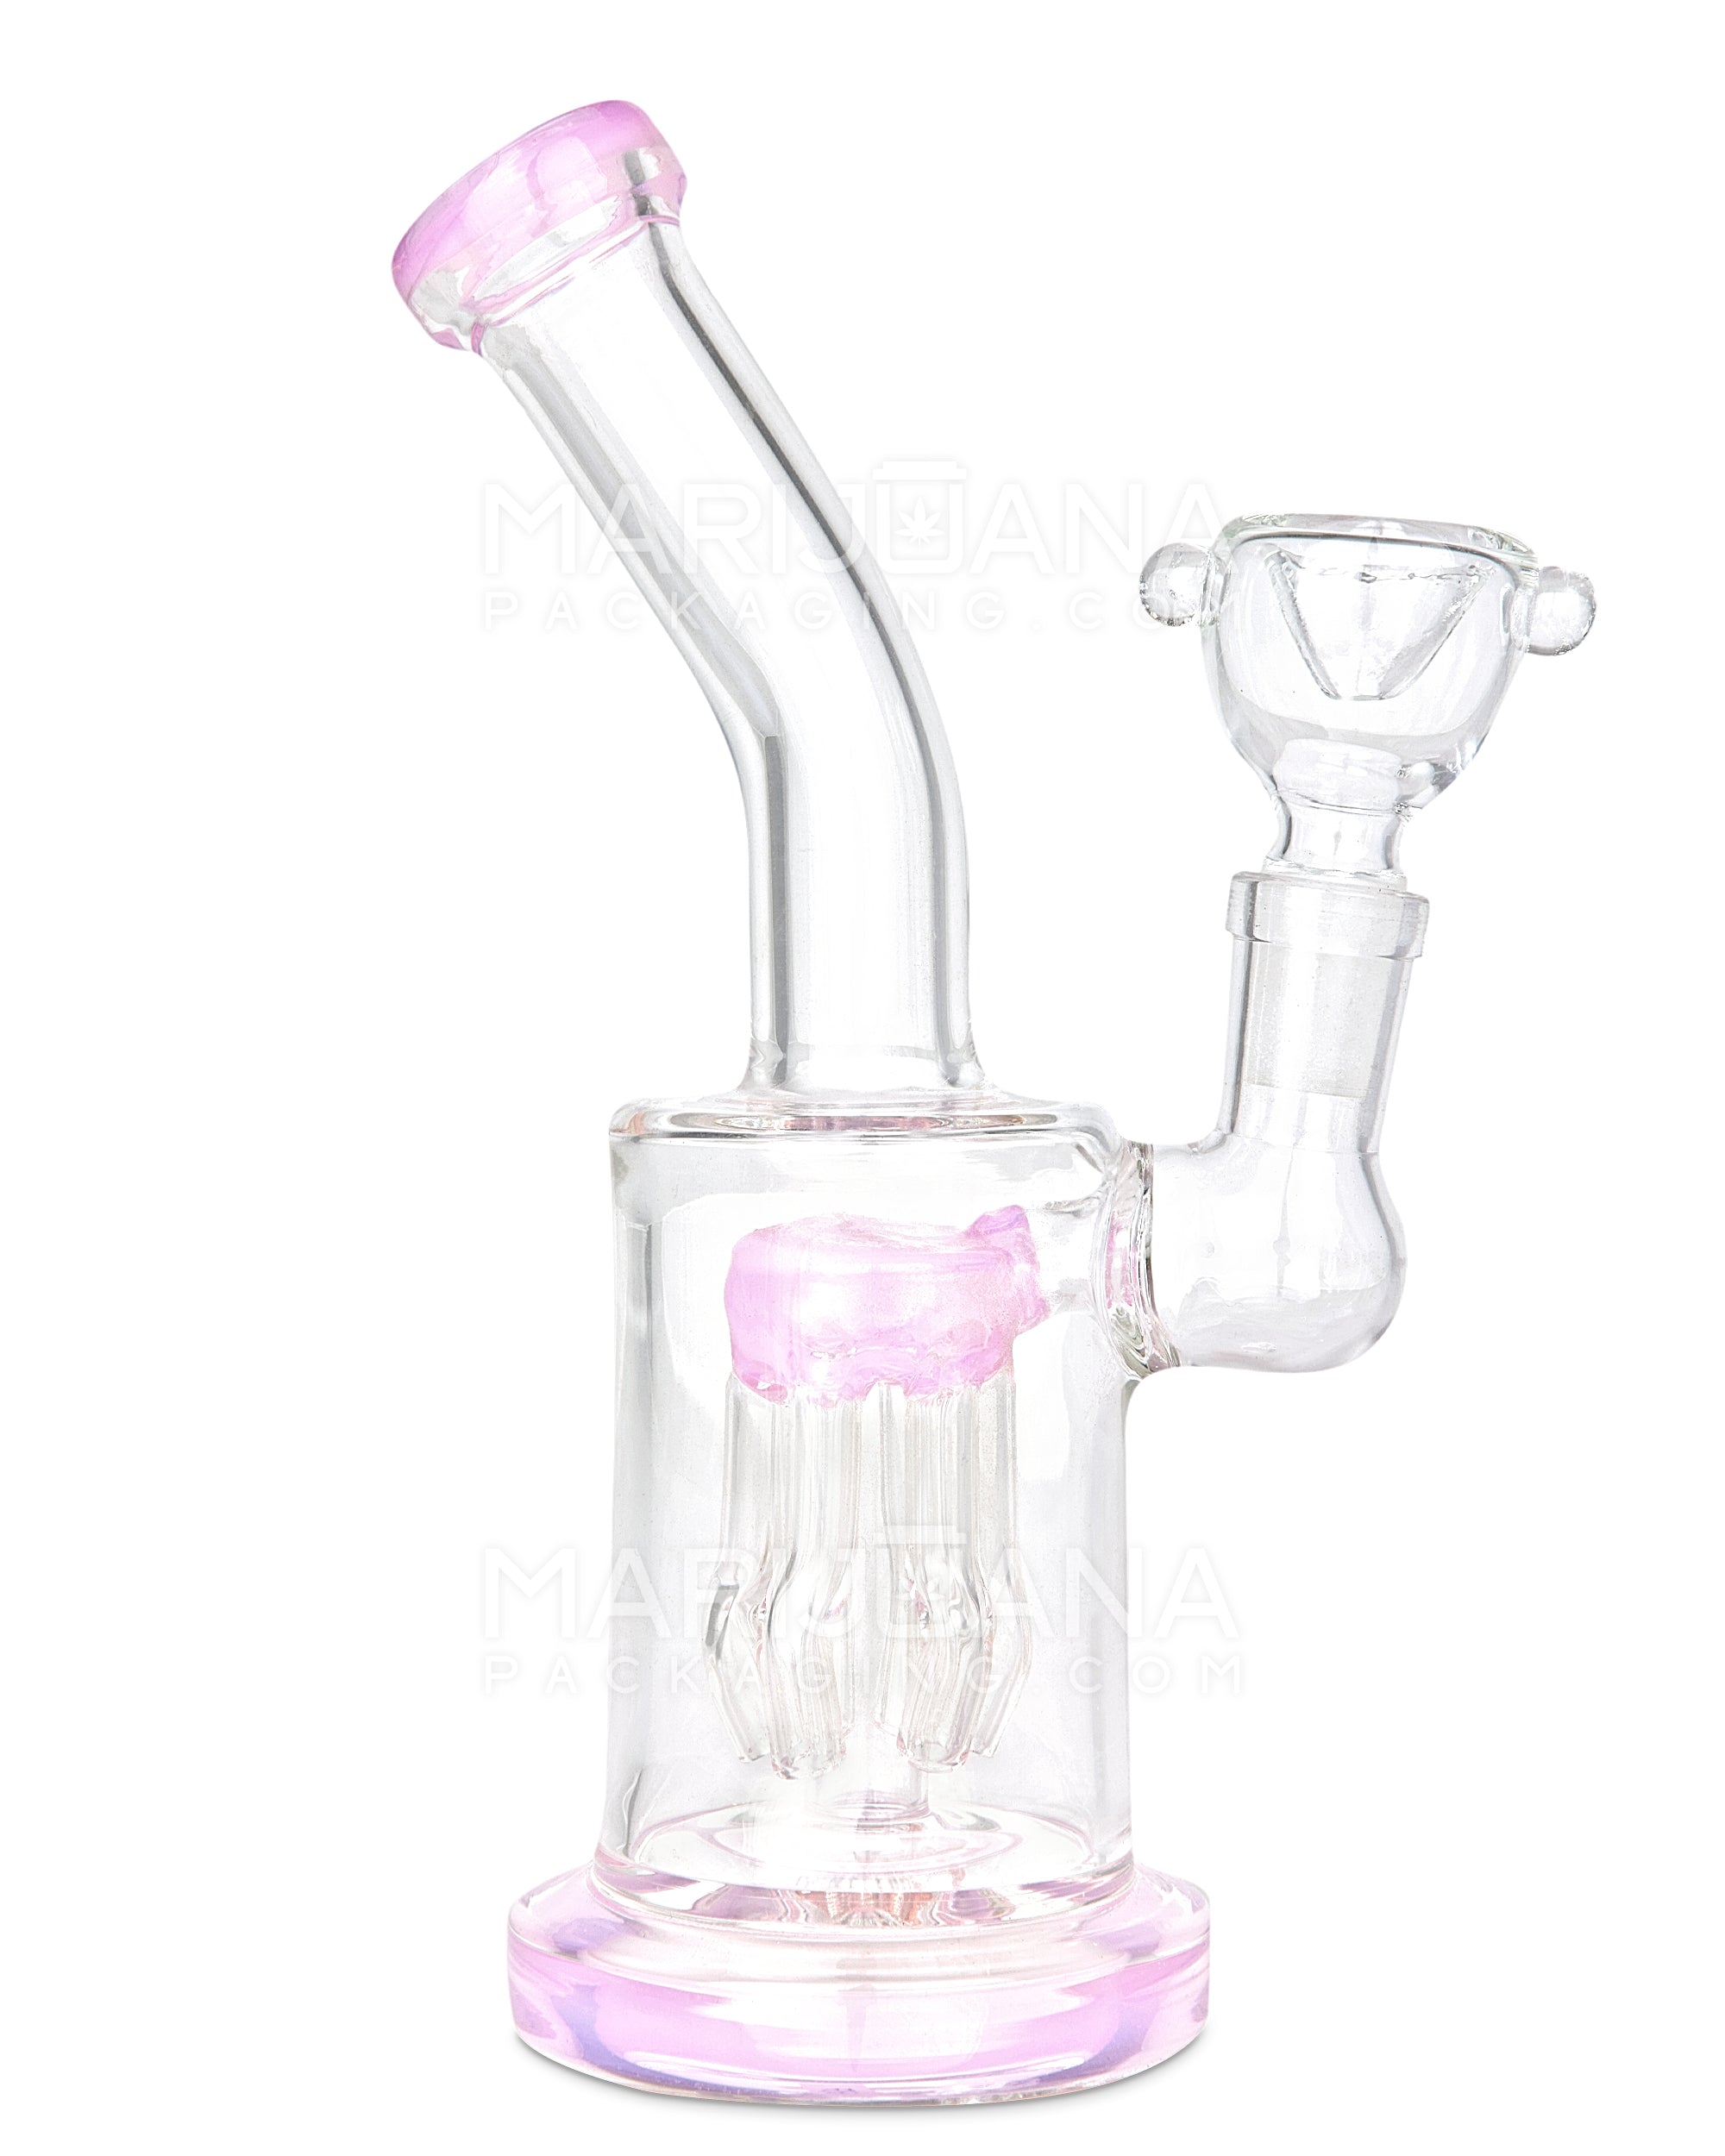 Bent Neck Tree Perc Glass Straight Water Pipe w/ Thick Base | 7in Tall - 14mm Bowl - Pink - 1